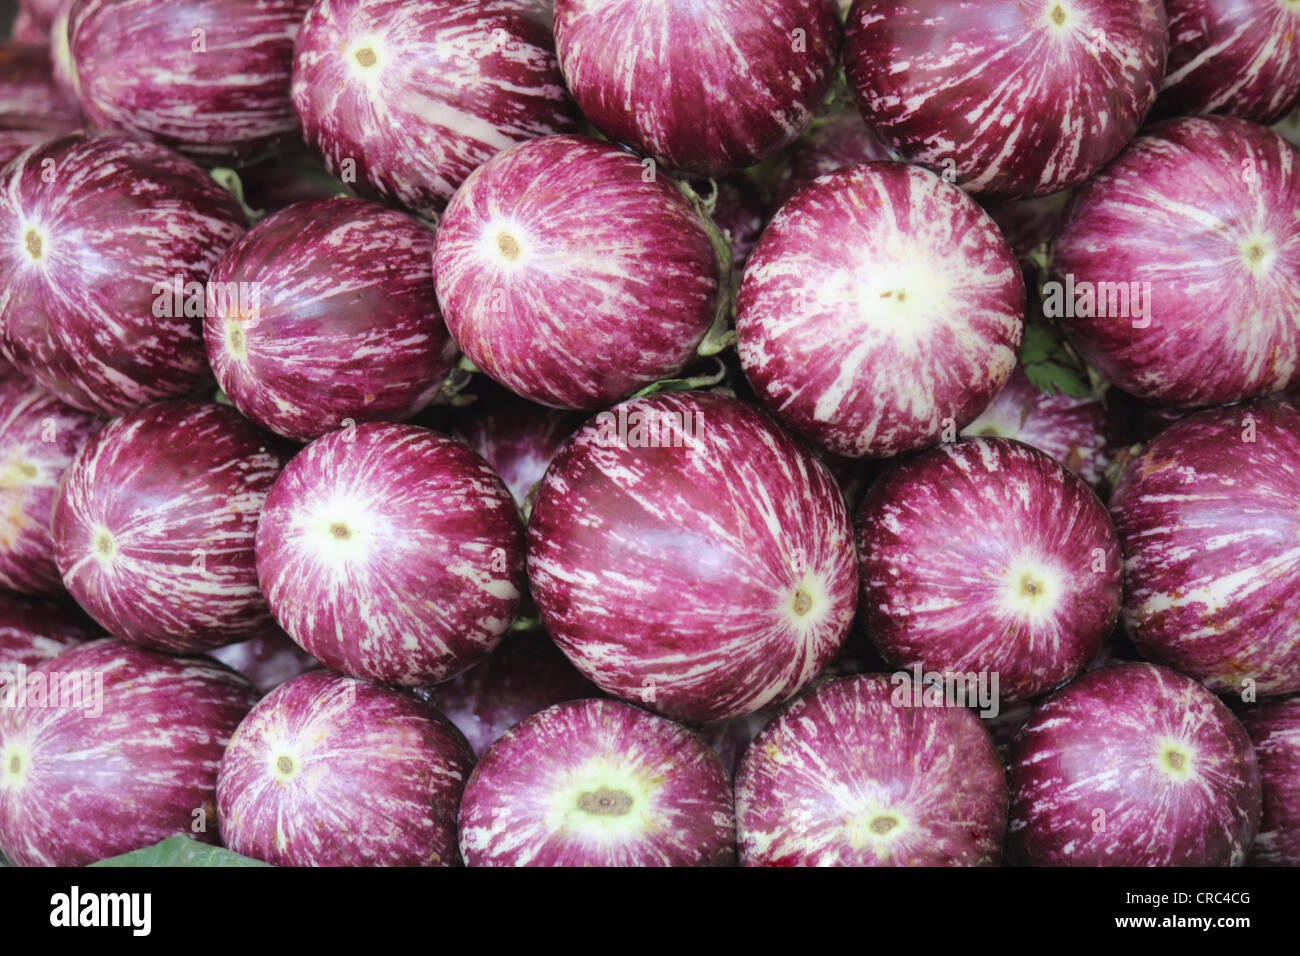 Brinjal (Solanum melongena - also known as egg plant) for sale in market at Pune, India Stock Photo